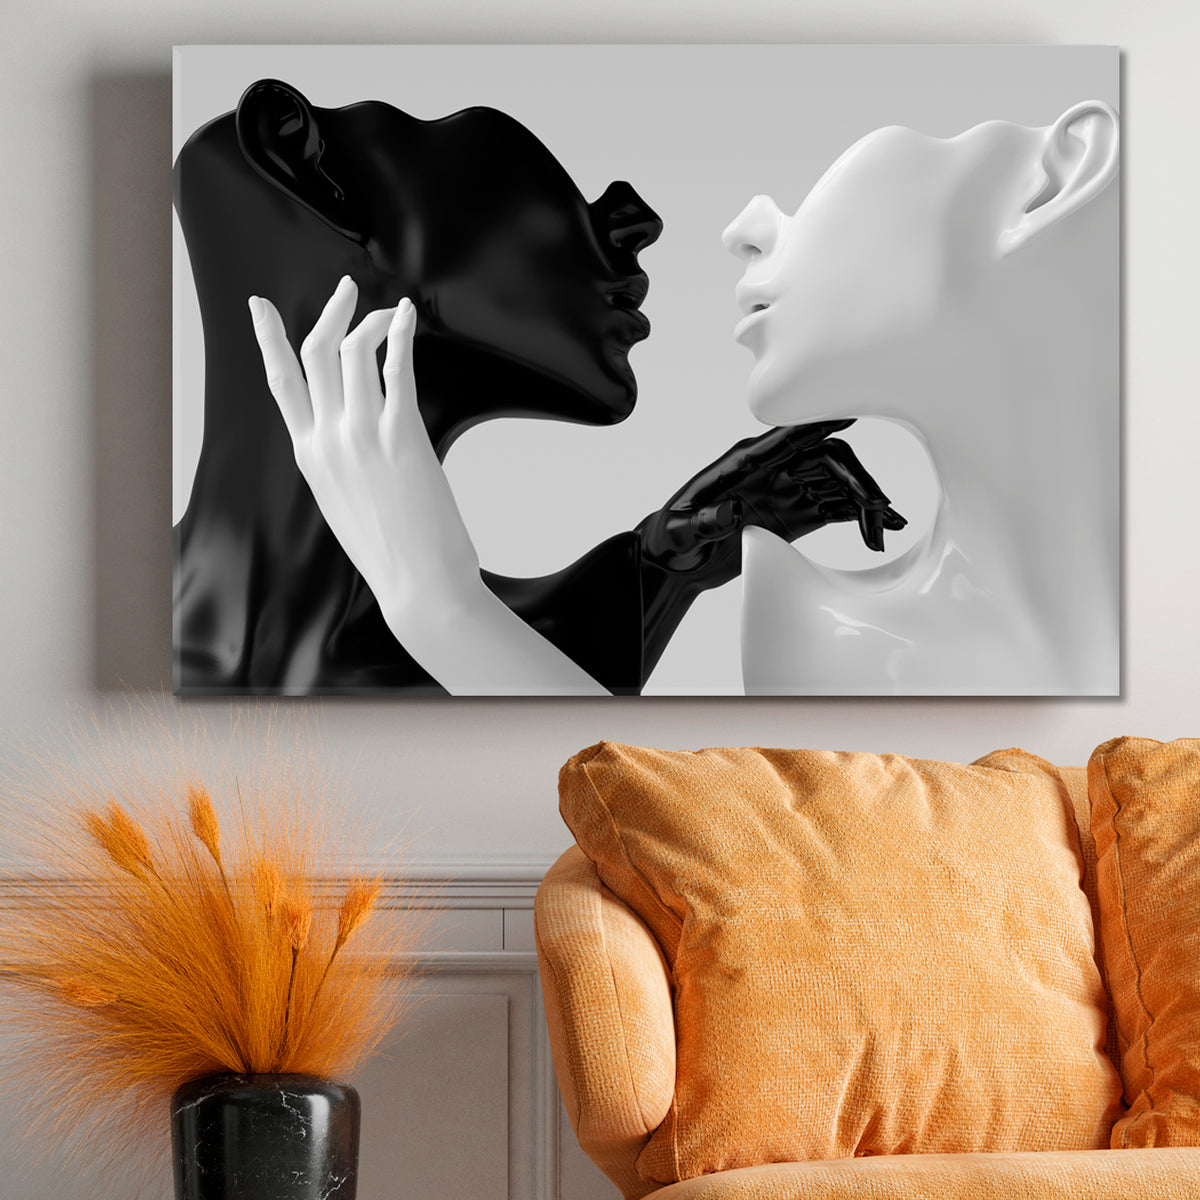 ABSTRACT ELEGANT Black and White Yin and Yang On Grey Black and White Wall Art Print Artesty 1 panel 24" x 16" 